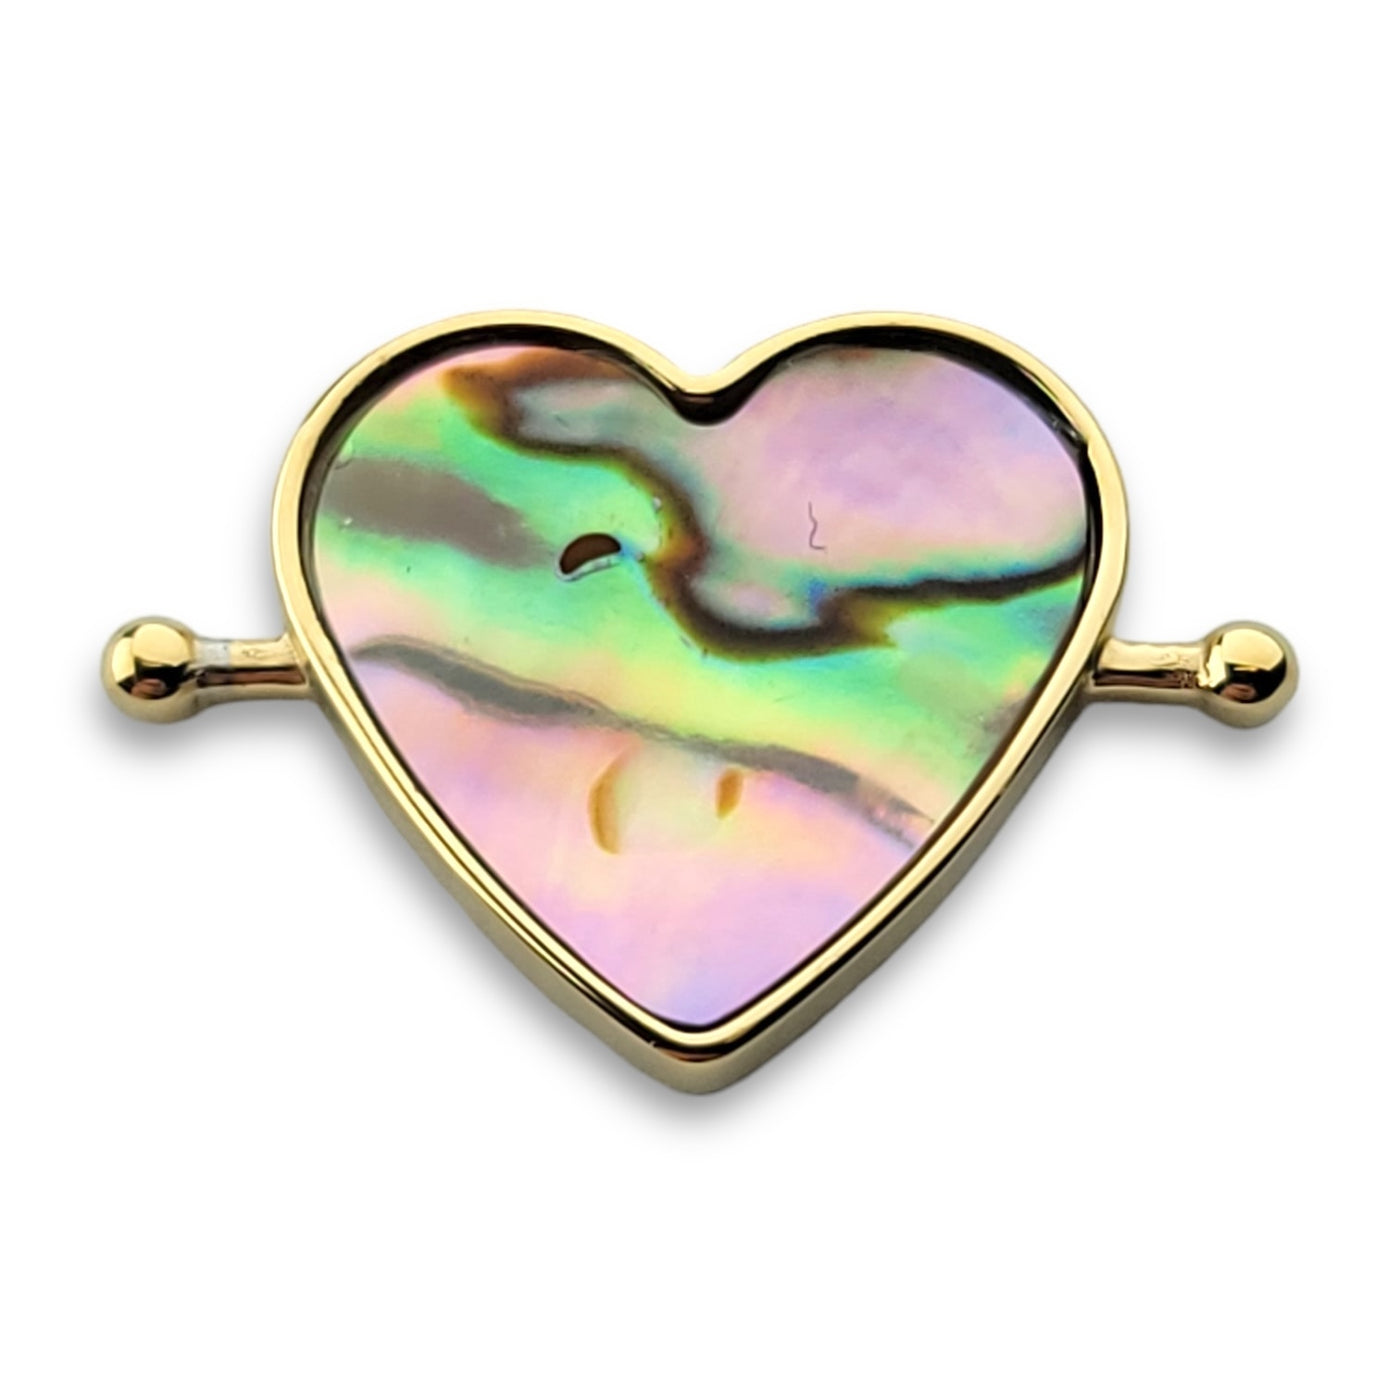 Abalone Shell Heart-shaped Crystal Element